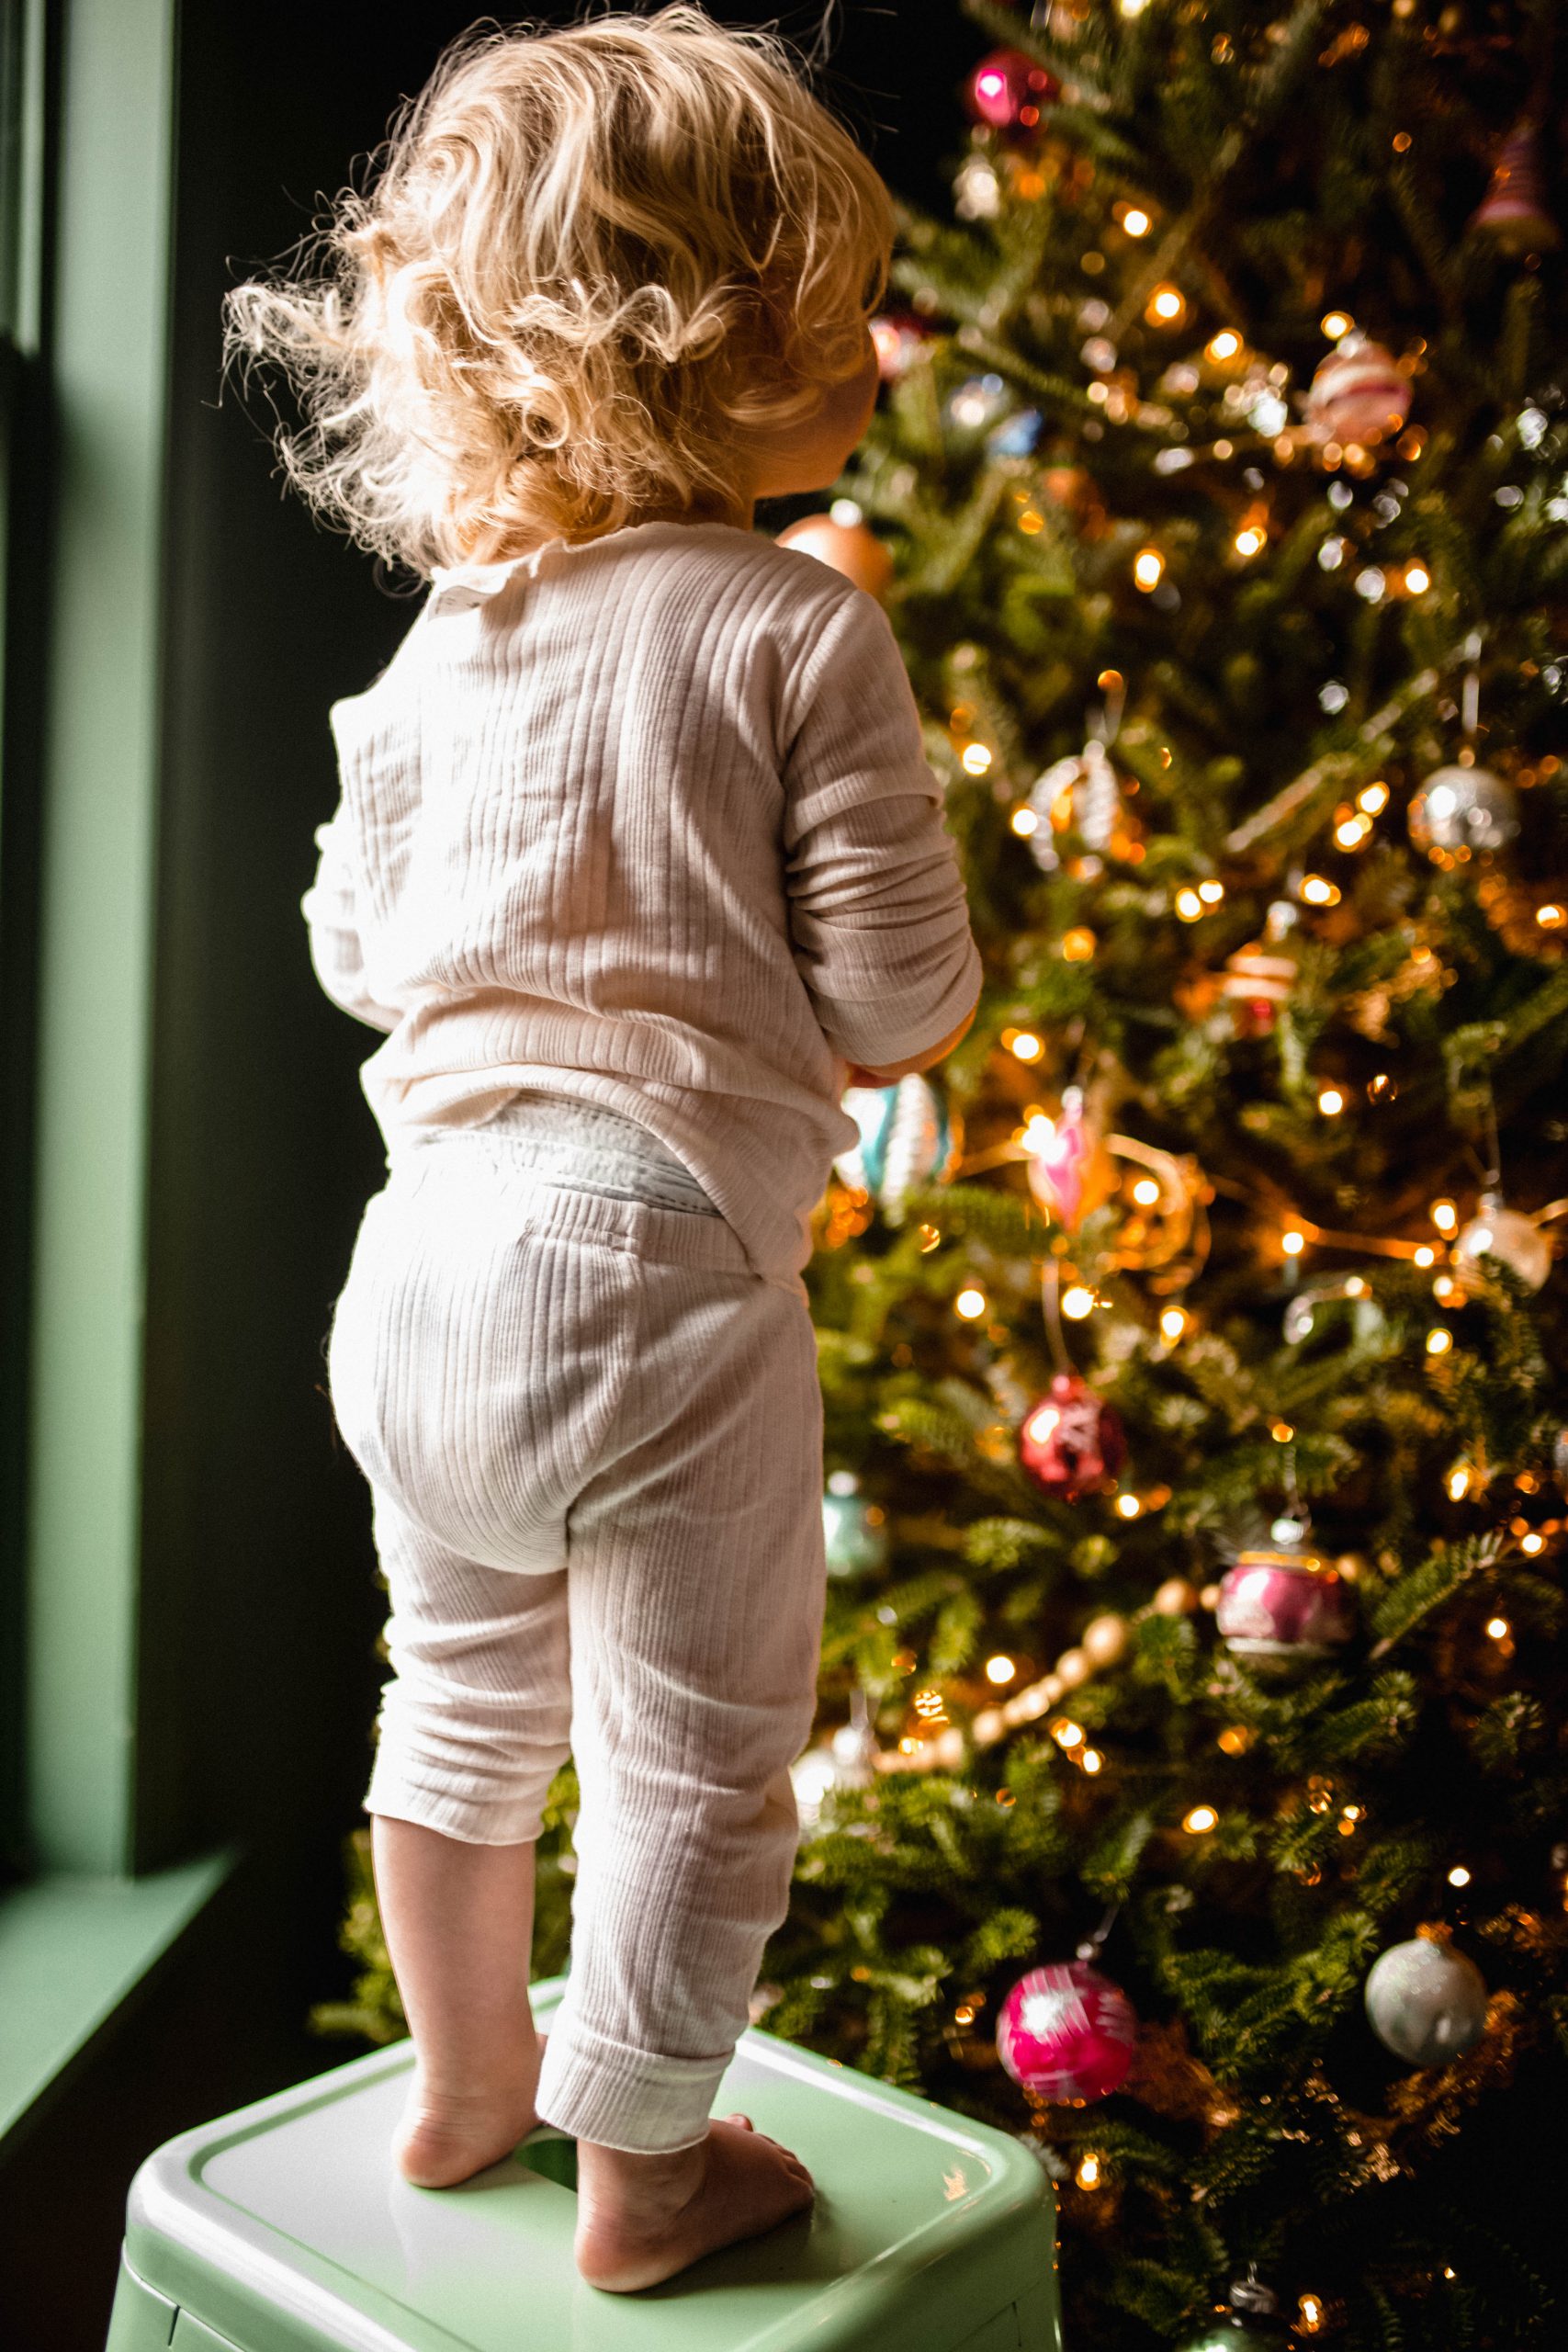 Little boy christmas traditions decorating the tree 